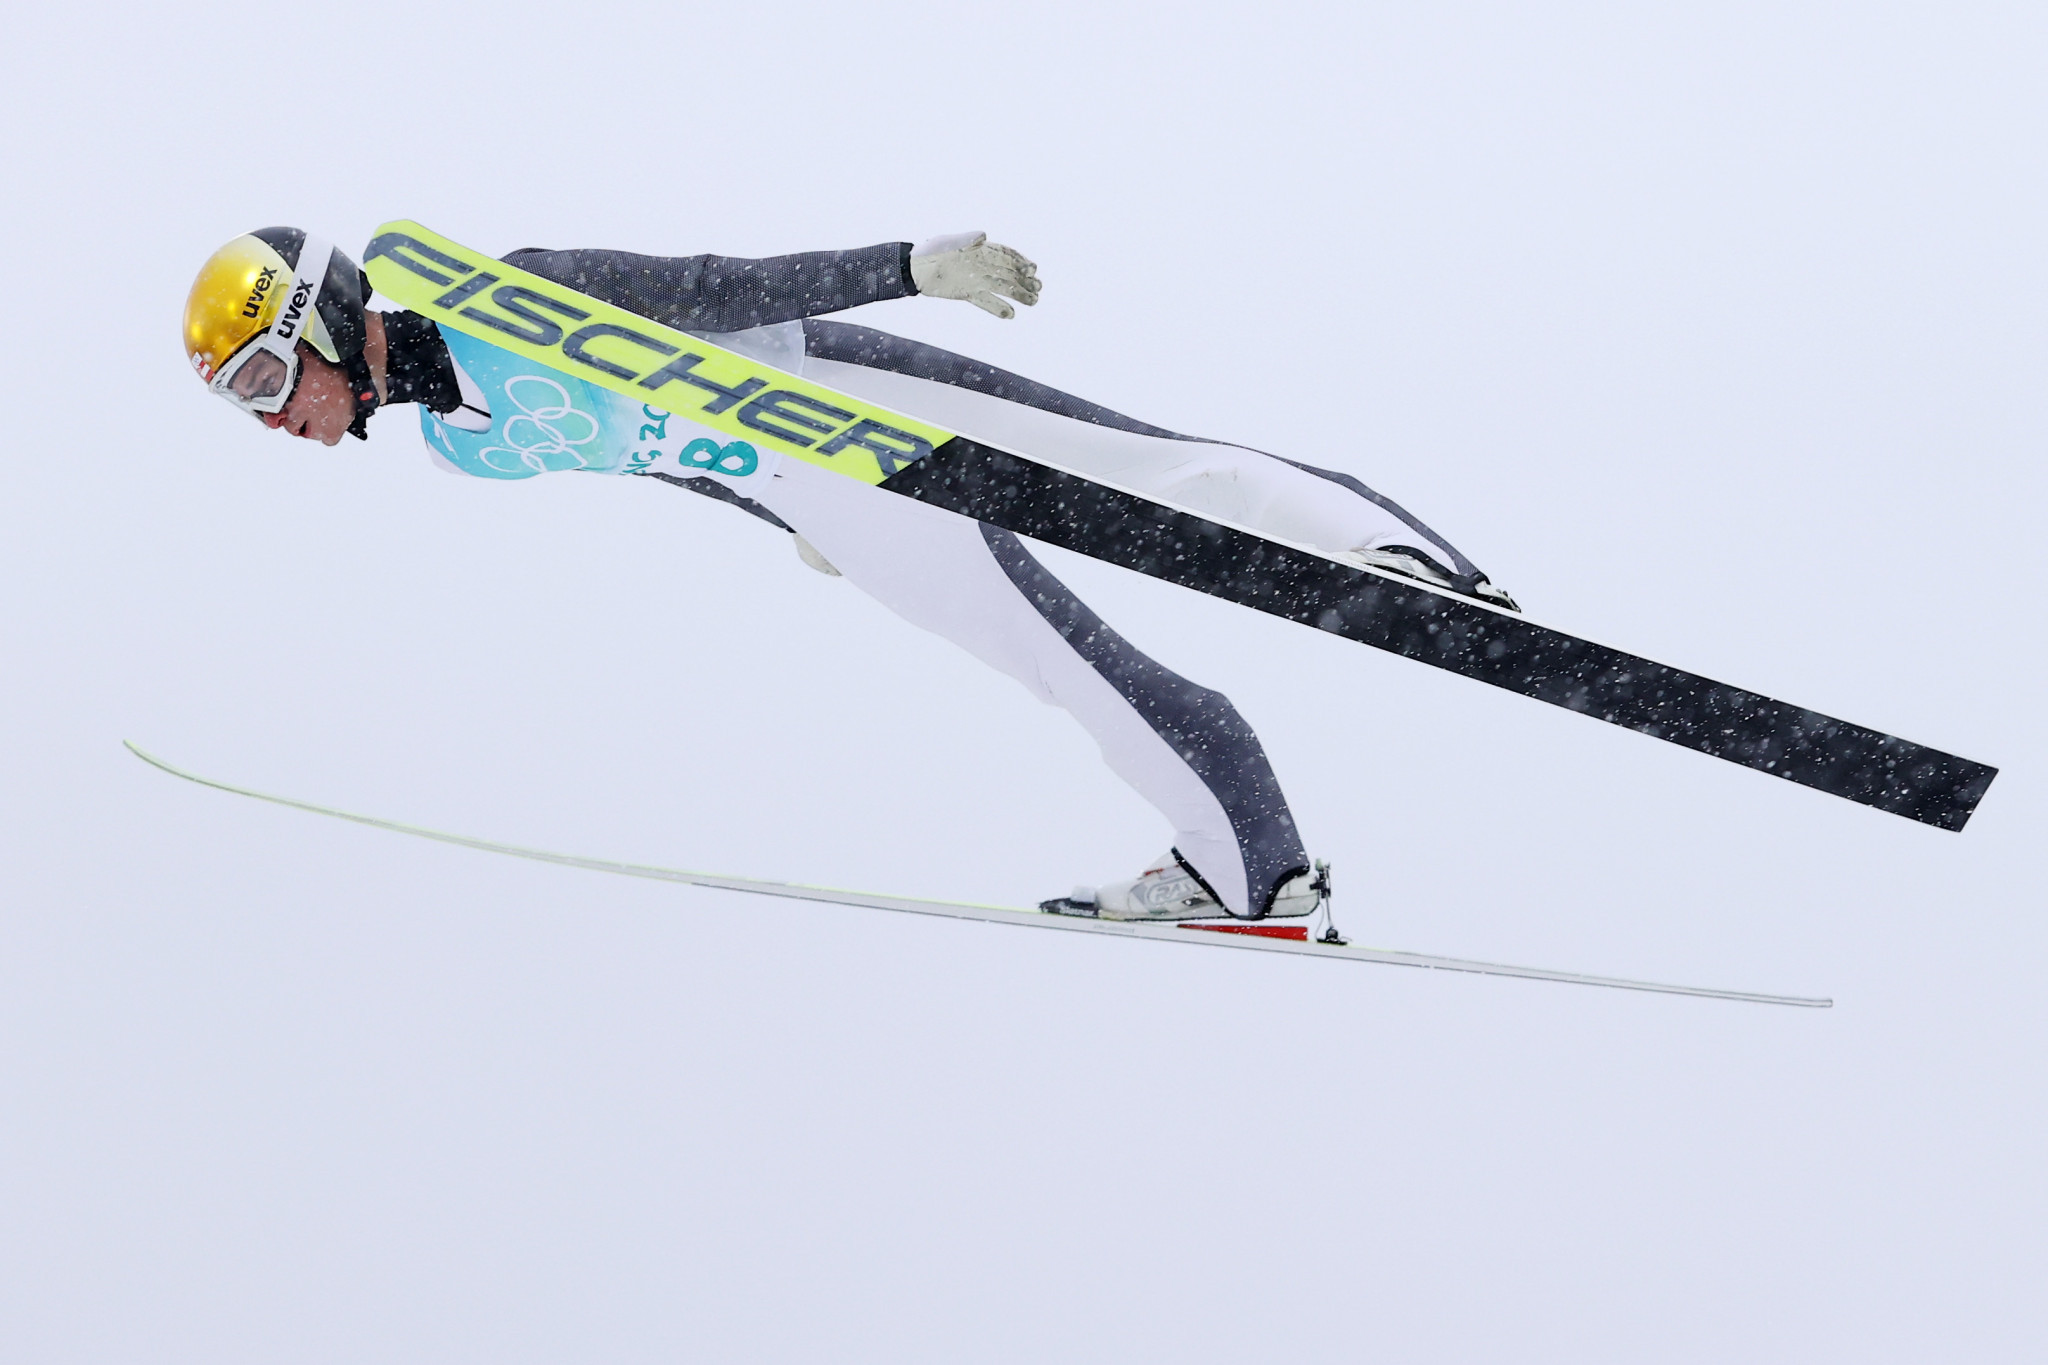 Johannes Lamparter won the men's Nordic Combined World Cup in Seefeld ©Getty Images